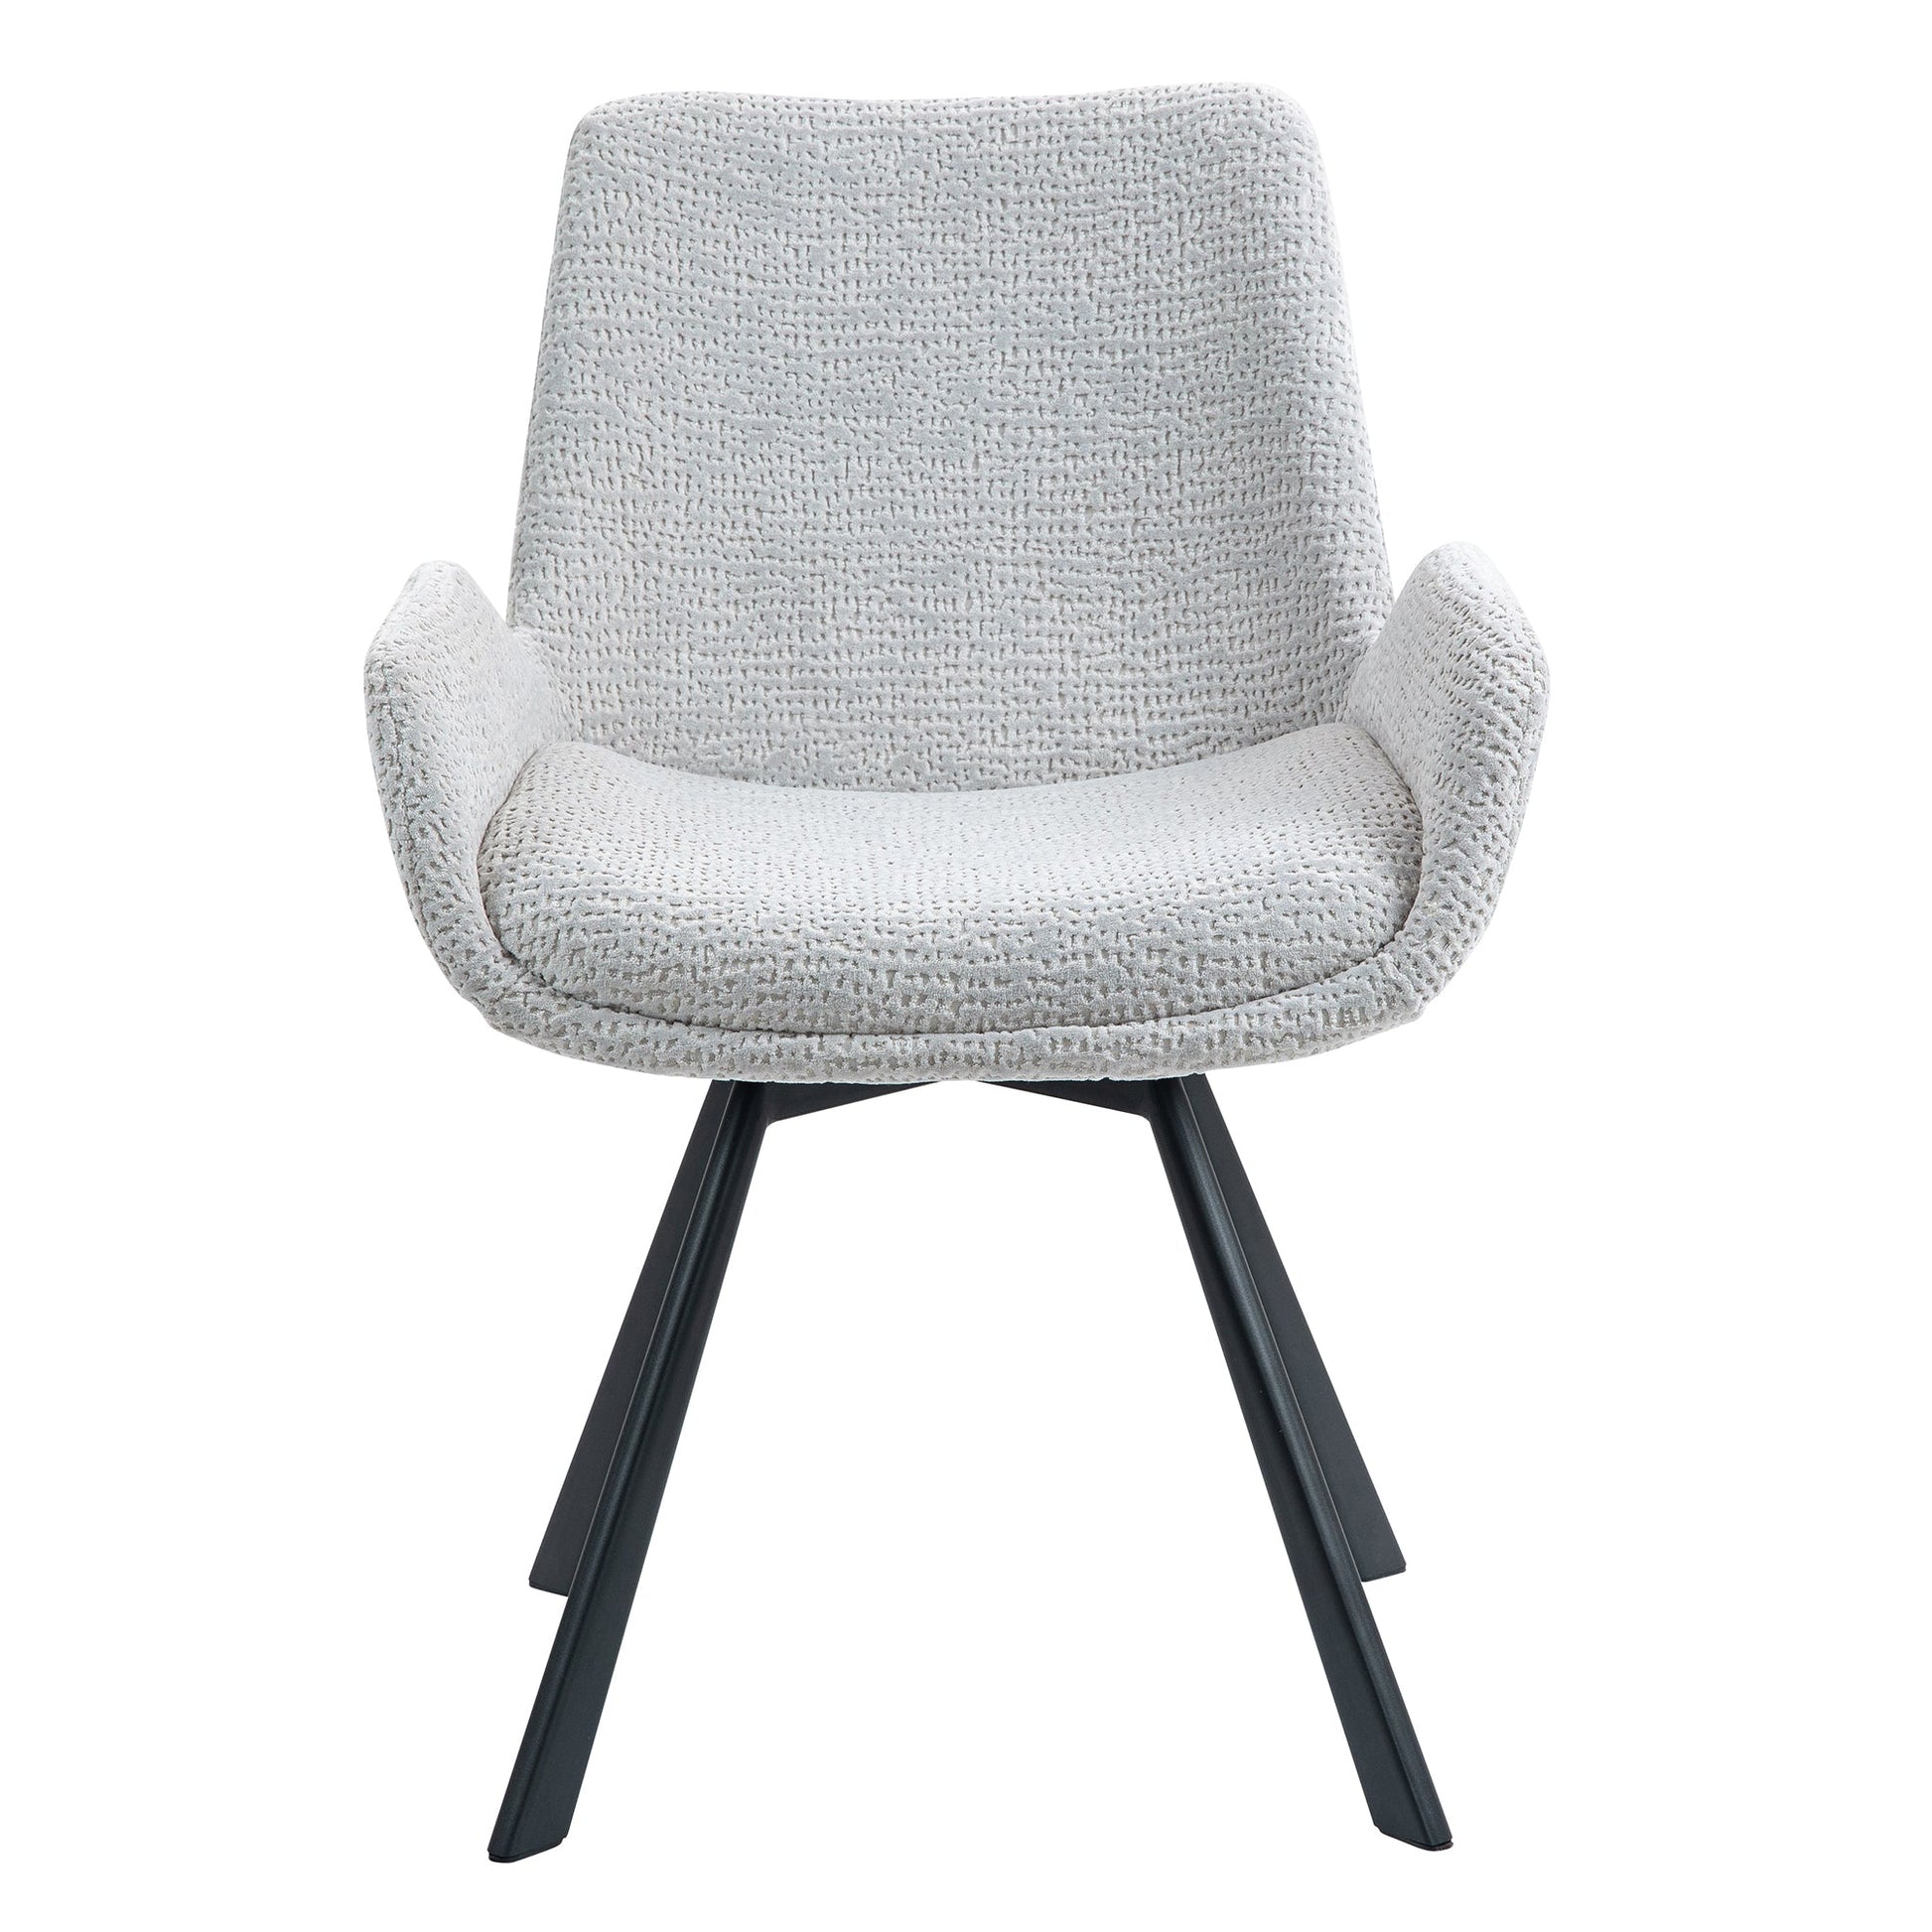 Swivel Dining Chairs | Set of 2 | Signy Grey Velvet - Your Bar Stools Canada